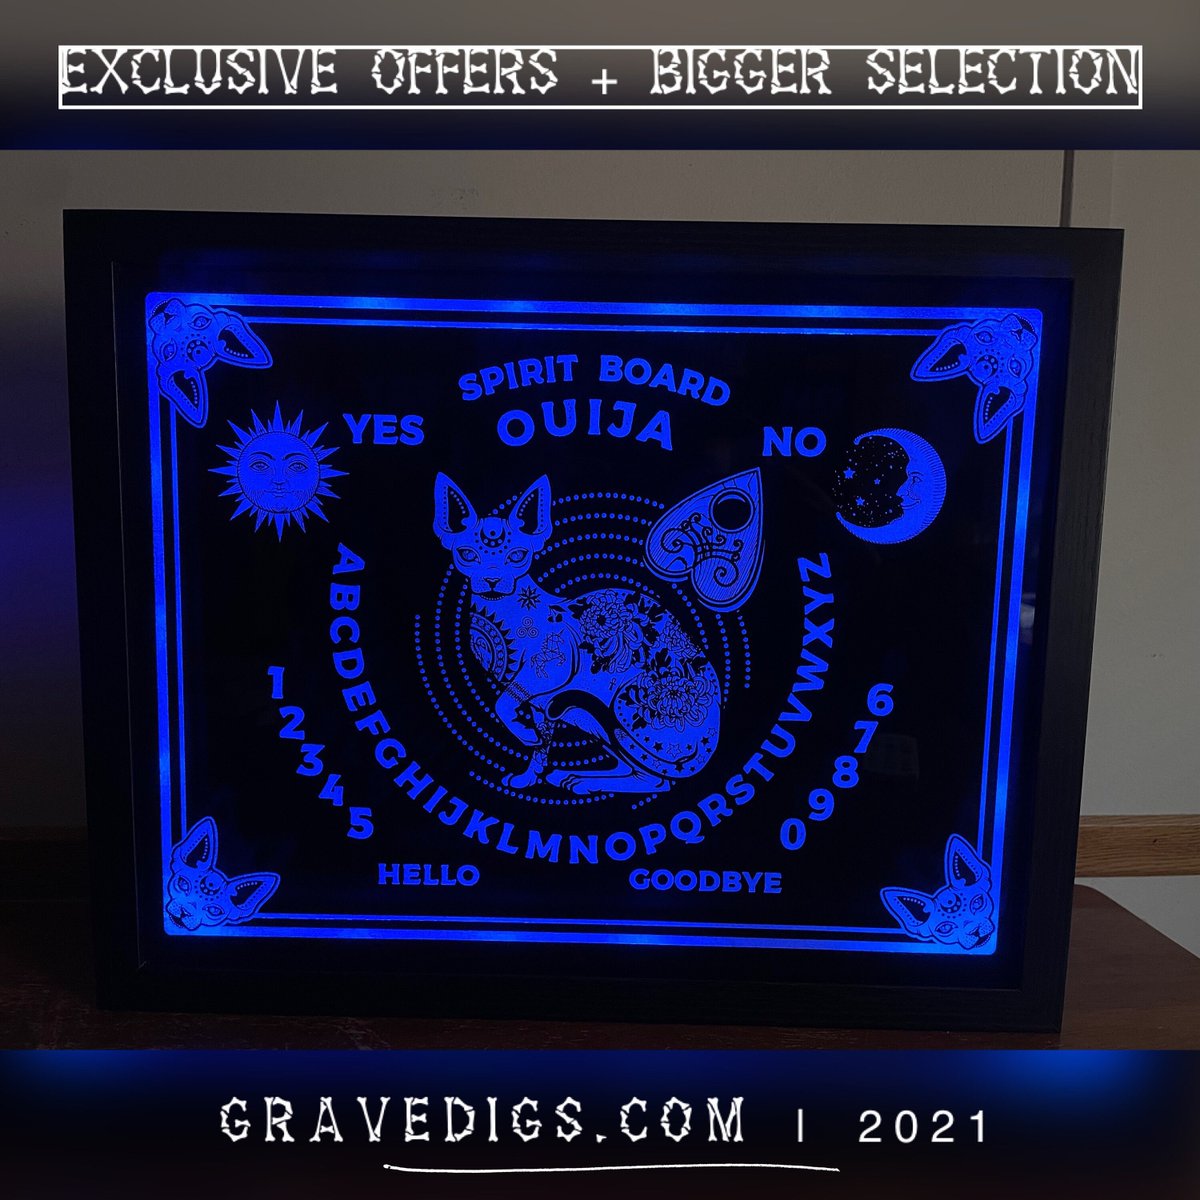 LED Ouija Board glass etched light box, remote or smart phone app controlled. 🔥🖤💀

gravedigs.com/listing/110521…

#ouijaboard #lightbox #lamp #spiritboard #homedecor #gothic #gothdecor #gothicdecor #gothicart #darkart #gothicstyle #gothicaesthetic #gothicgirls #witch #halloween